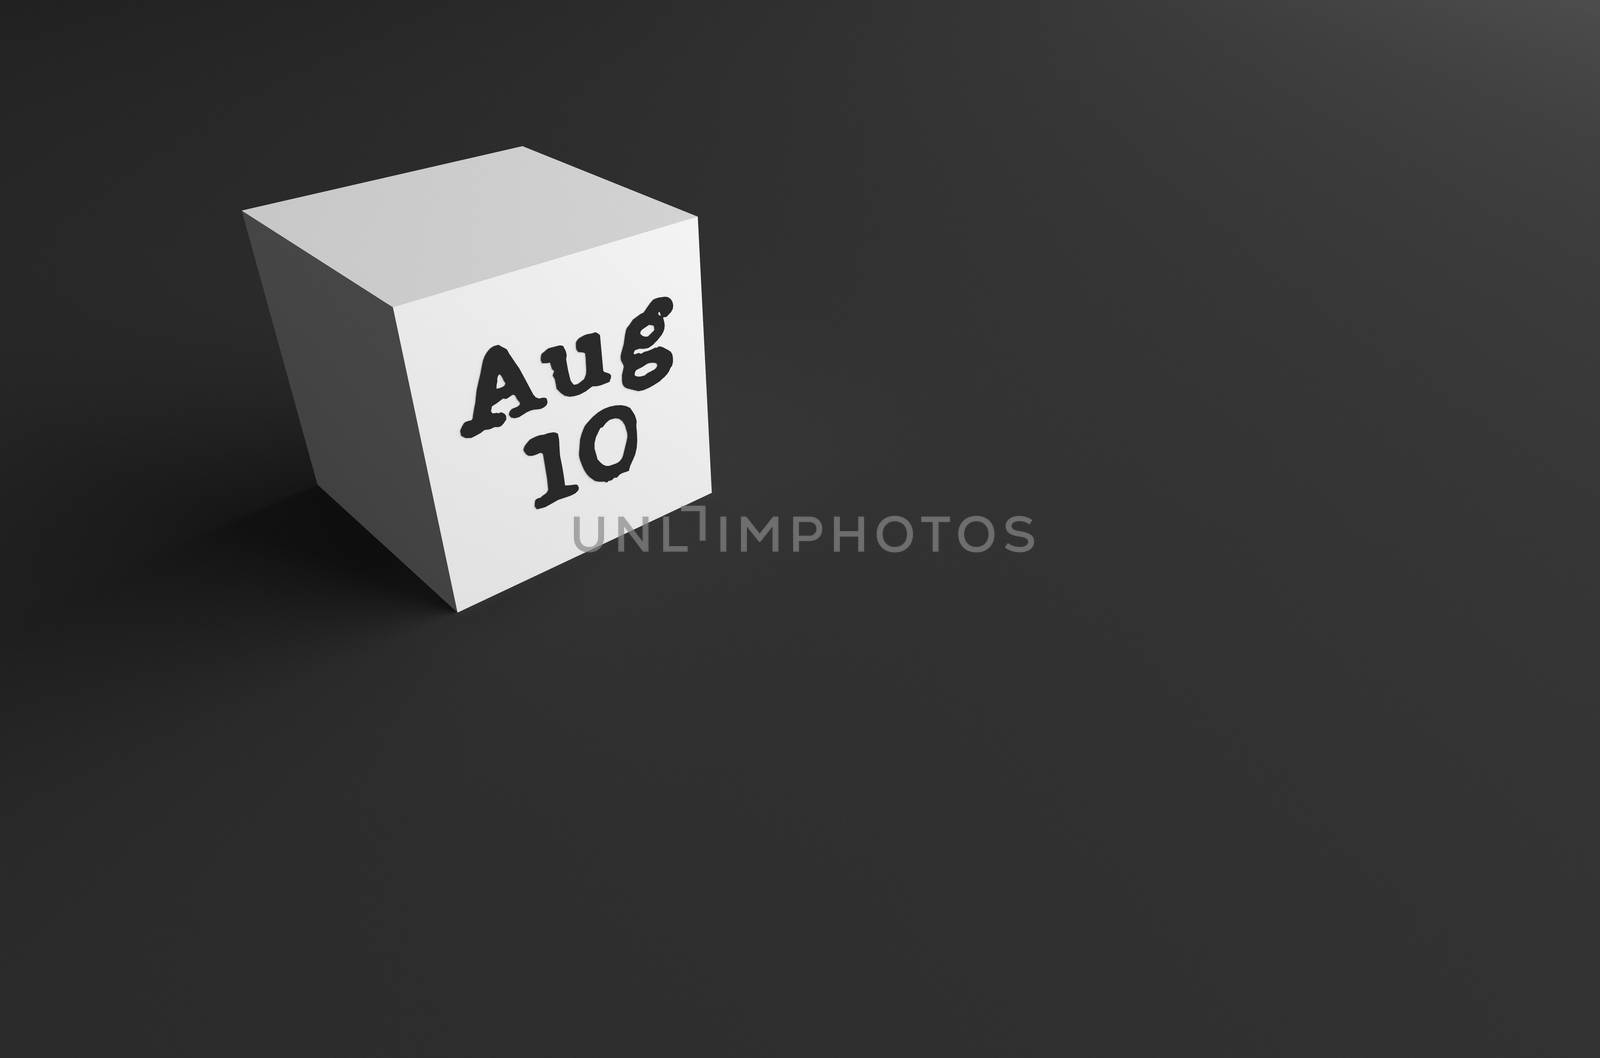 3D RENDERING OF Aug (ABBREVIATION OF AUGUST) 10 ON WHITE CUBE